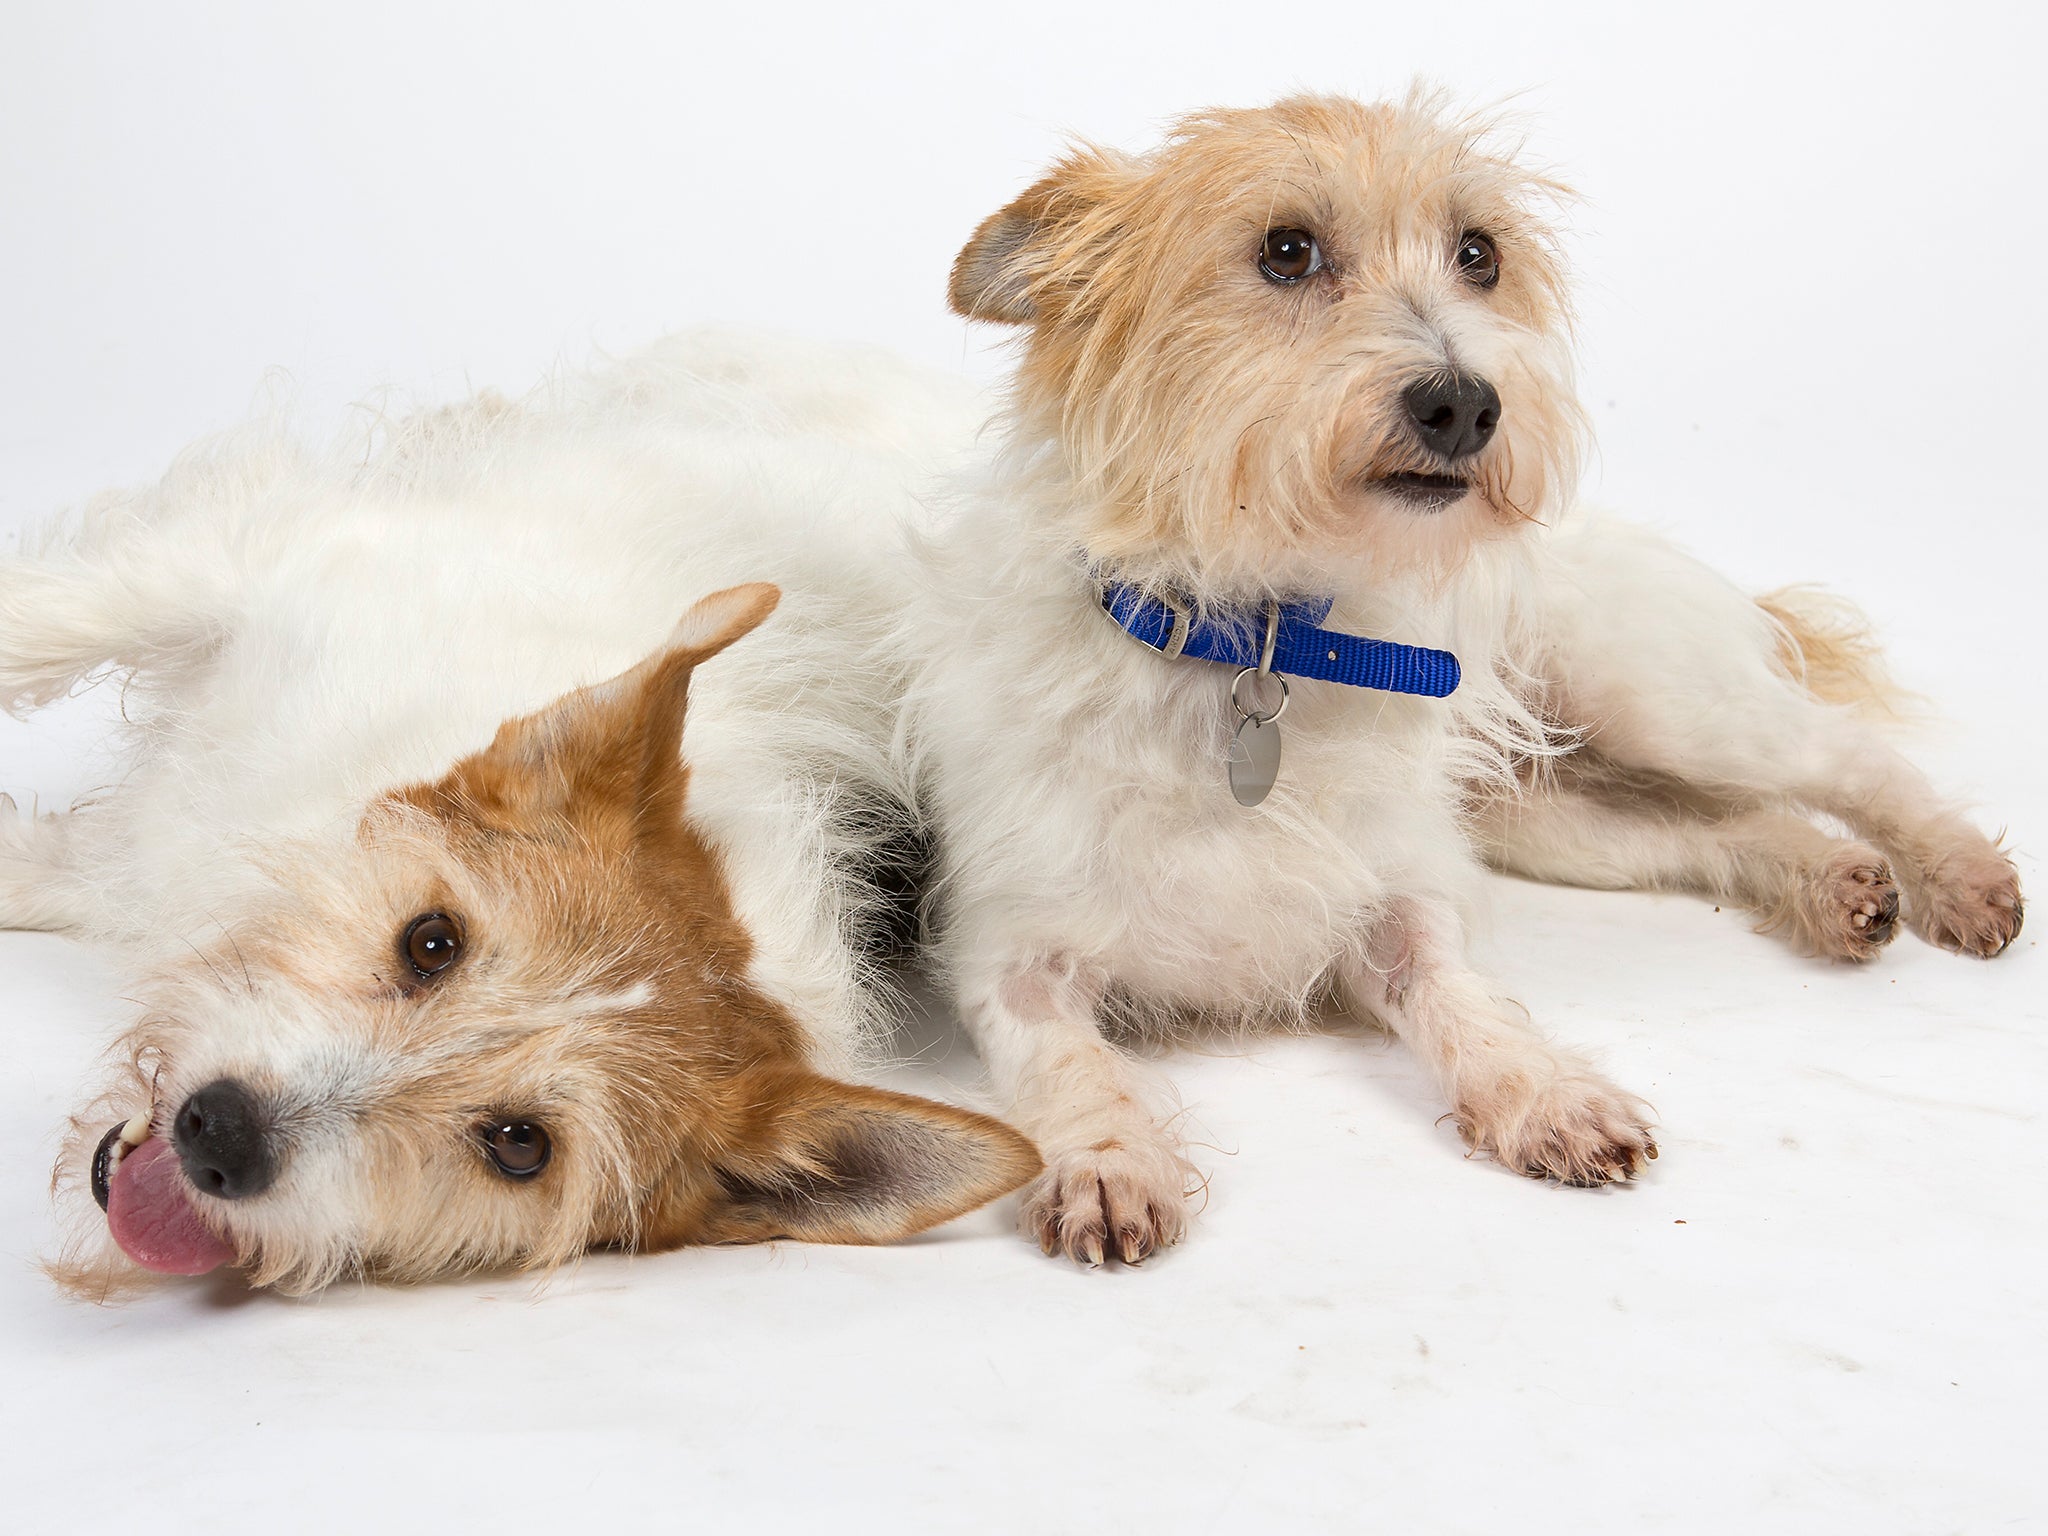 Nine-year-old Jack Russell terrier siblings Cherry and Chumley